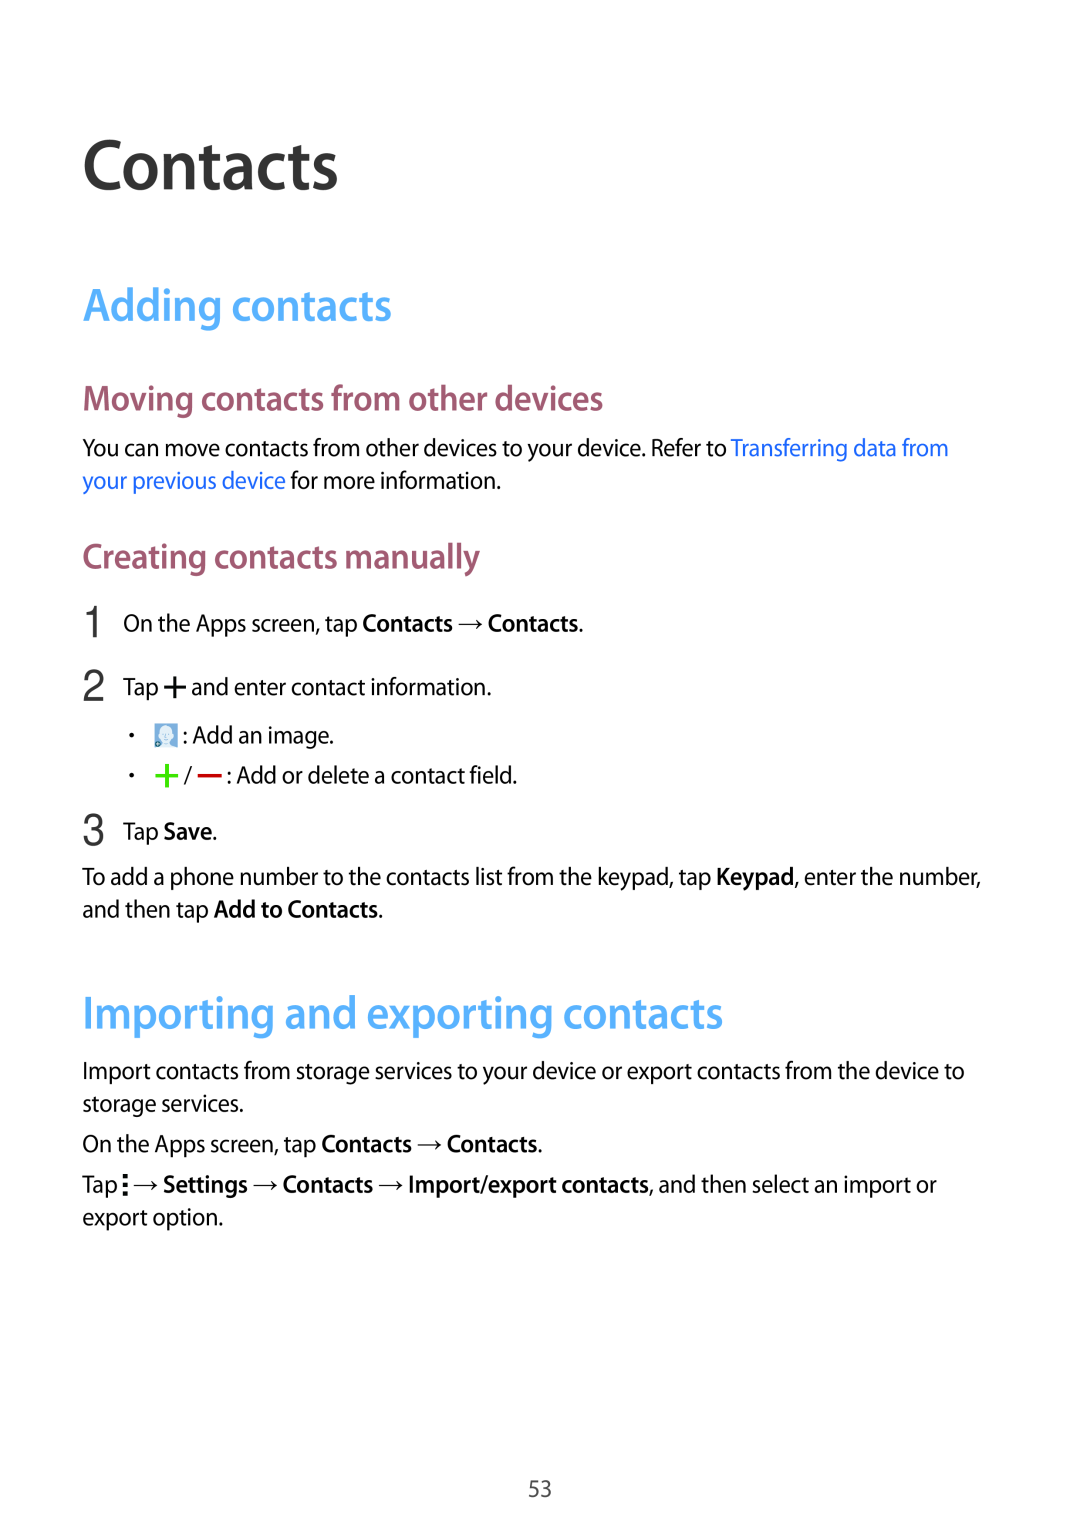 Samsung SM-A300FZWUVD2 Contacts, Adding contacts, Importing and exporting contacts, Moving contacts from other devices 